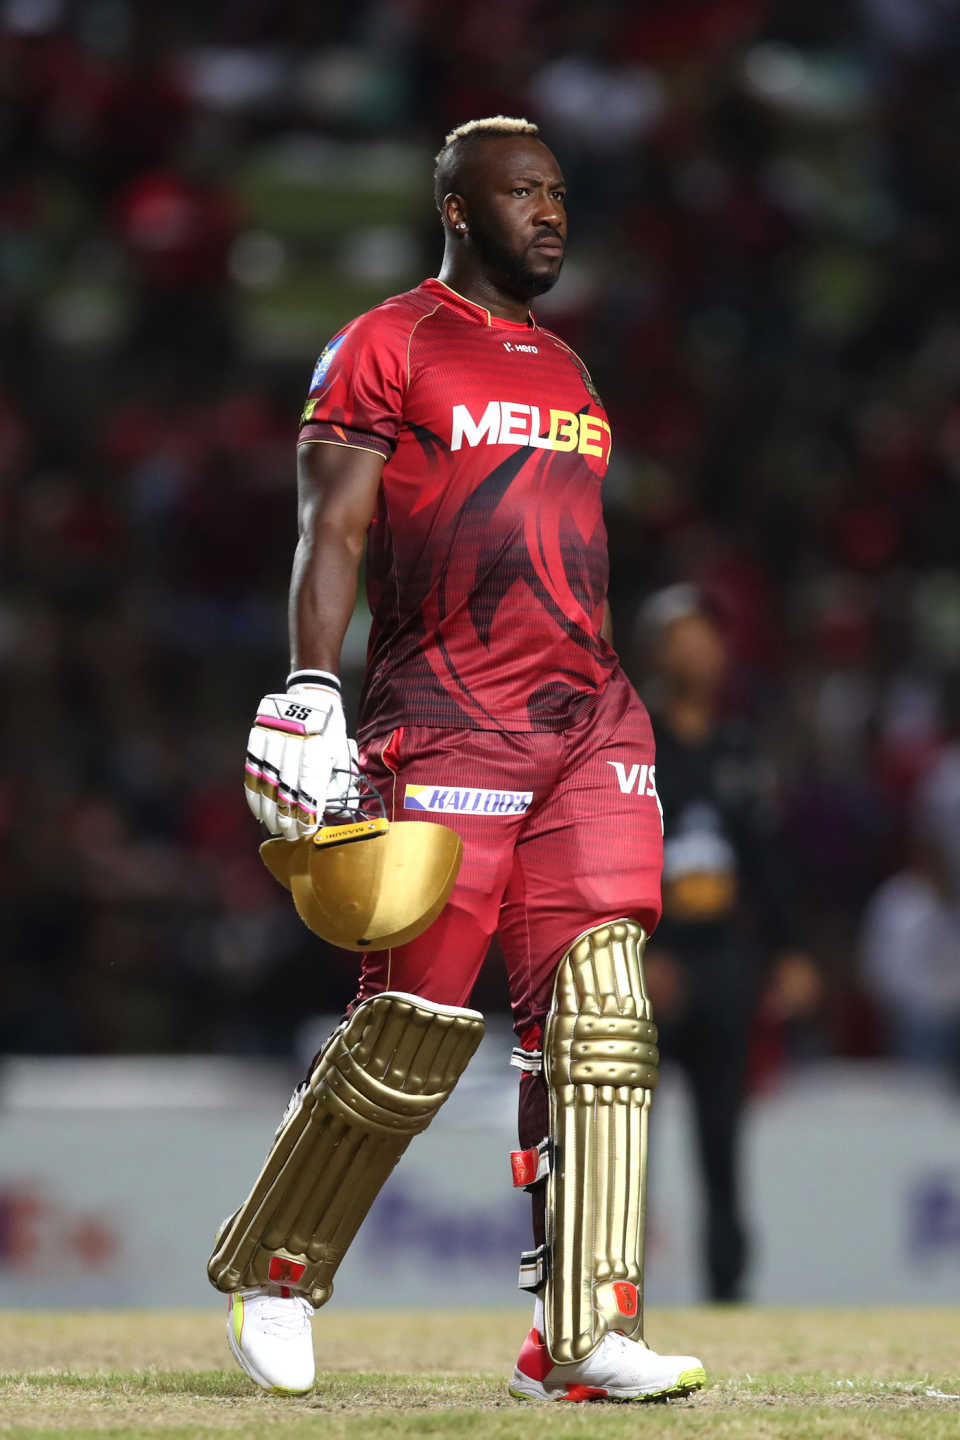 Andre Russell went 4, 6, 6 in the last three balls but it wasn't enough